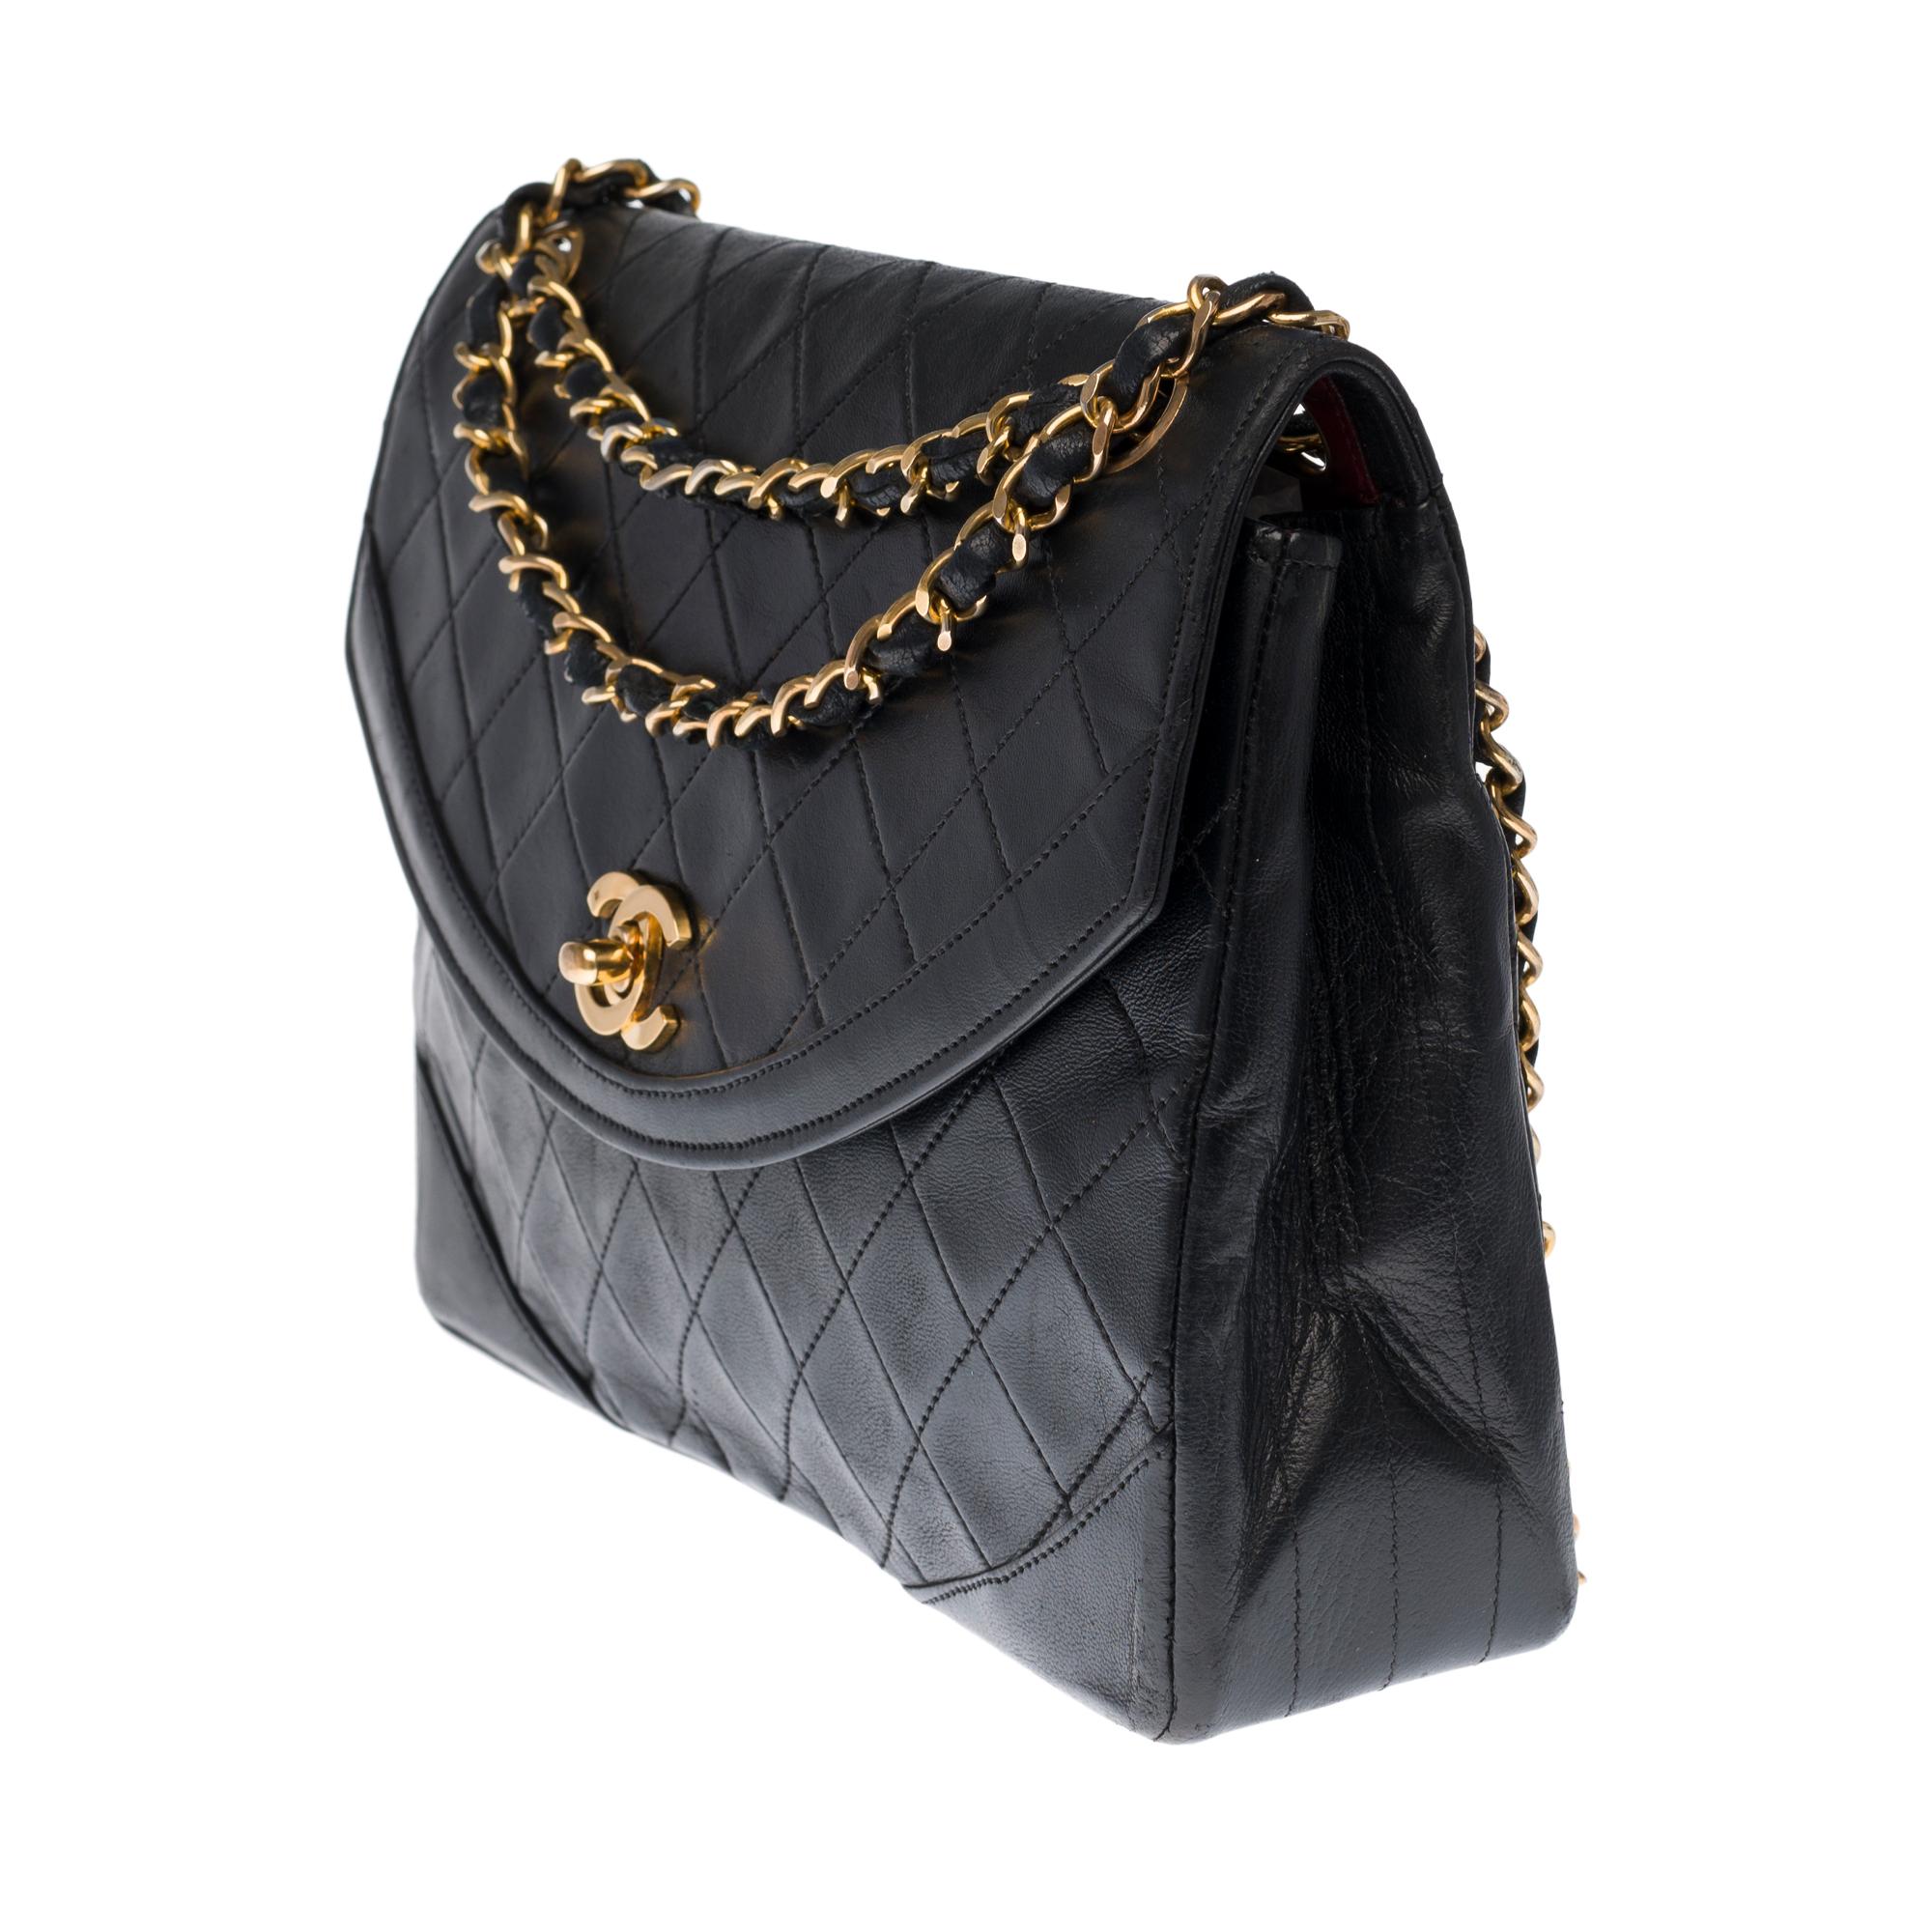 Black Chanel Classic Shoulder bag in black quilted leather and gold hardware